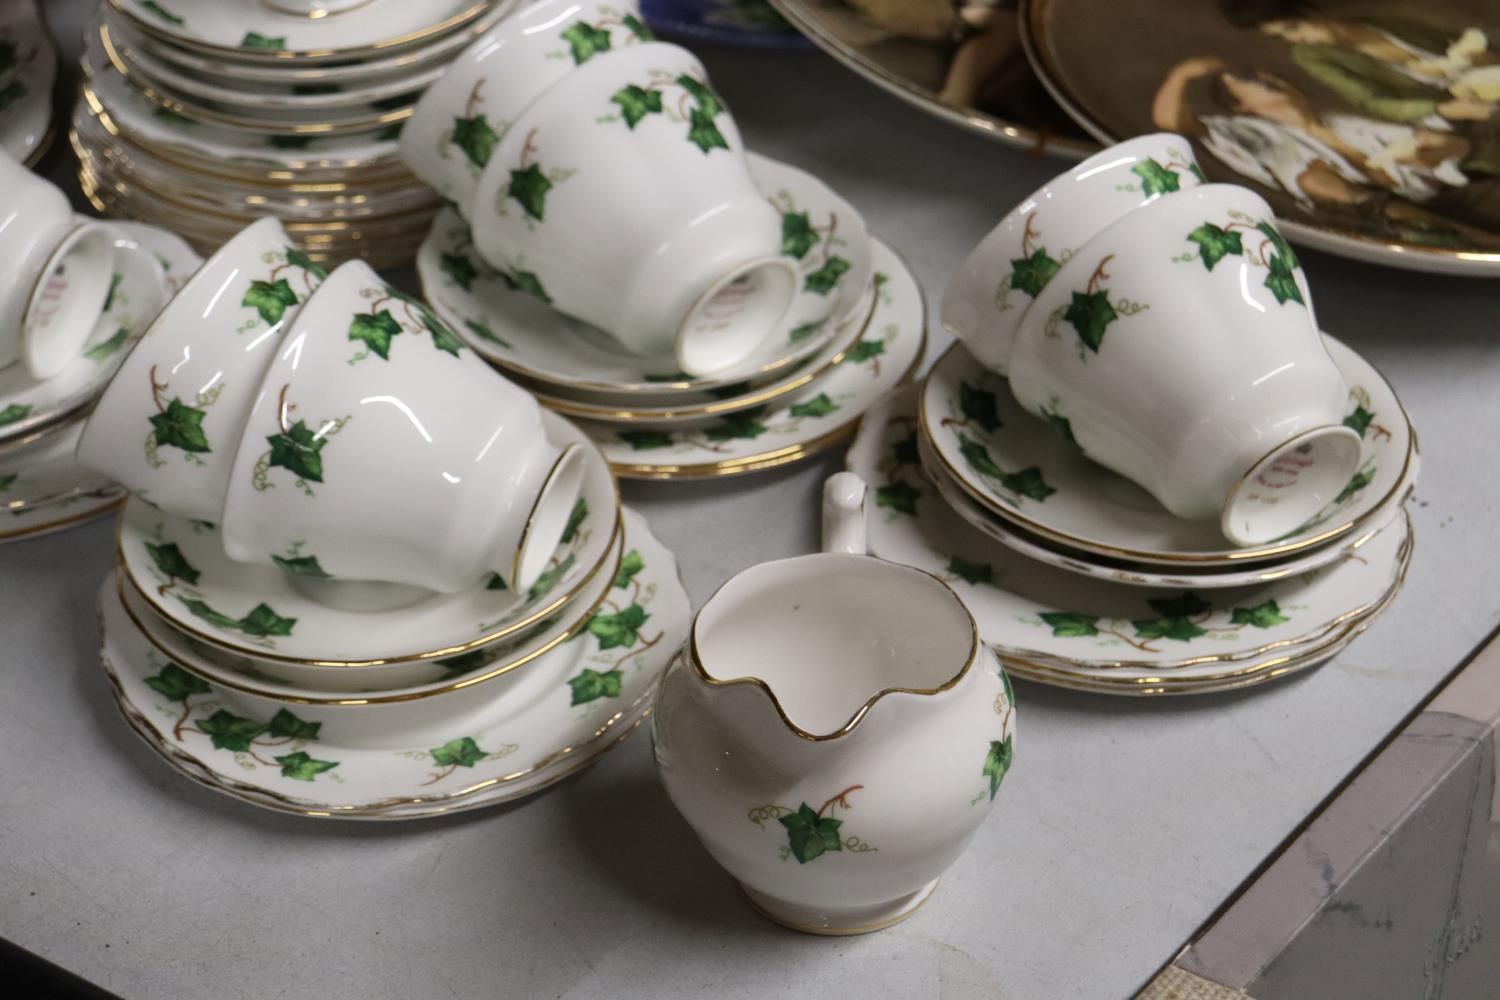 A COLCLOUGH 'IVY LEAF' PART TEASET TO INCLUDE CAKE PLATES, A CREAM JUG, CUPS, SAUCERS AND SIDE - Image 3 of 6